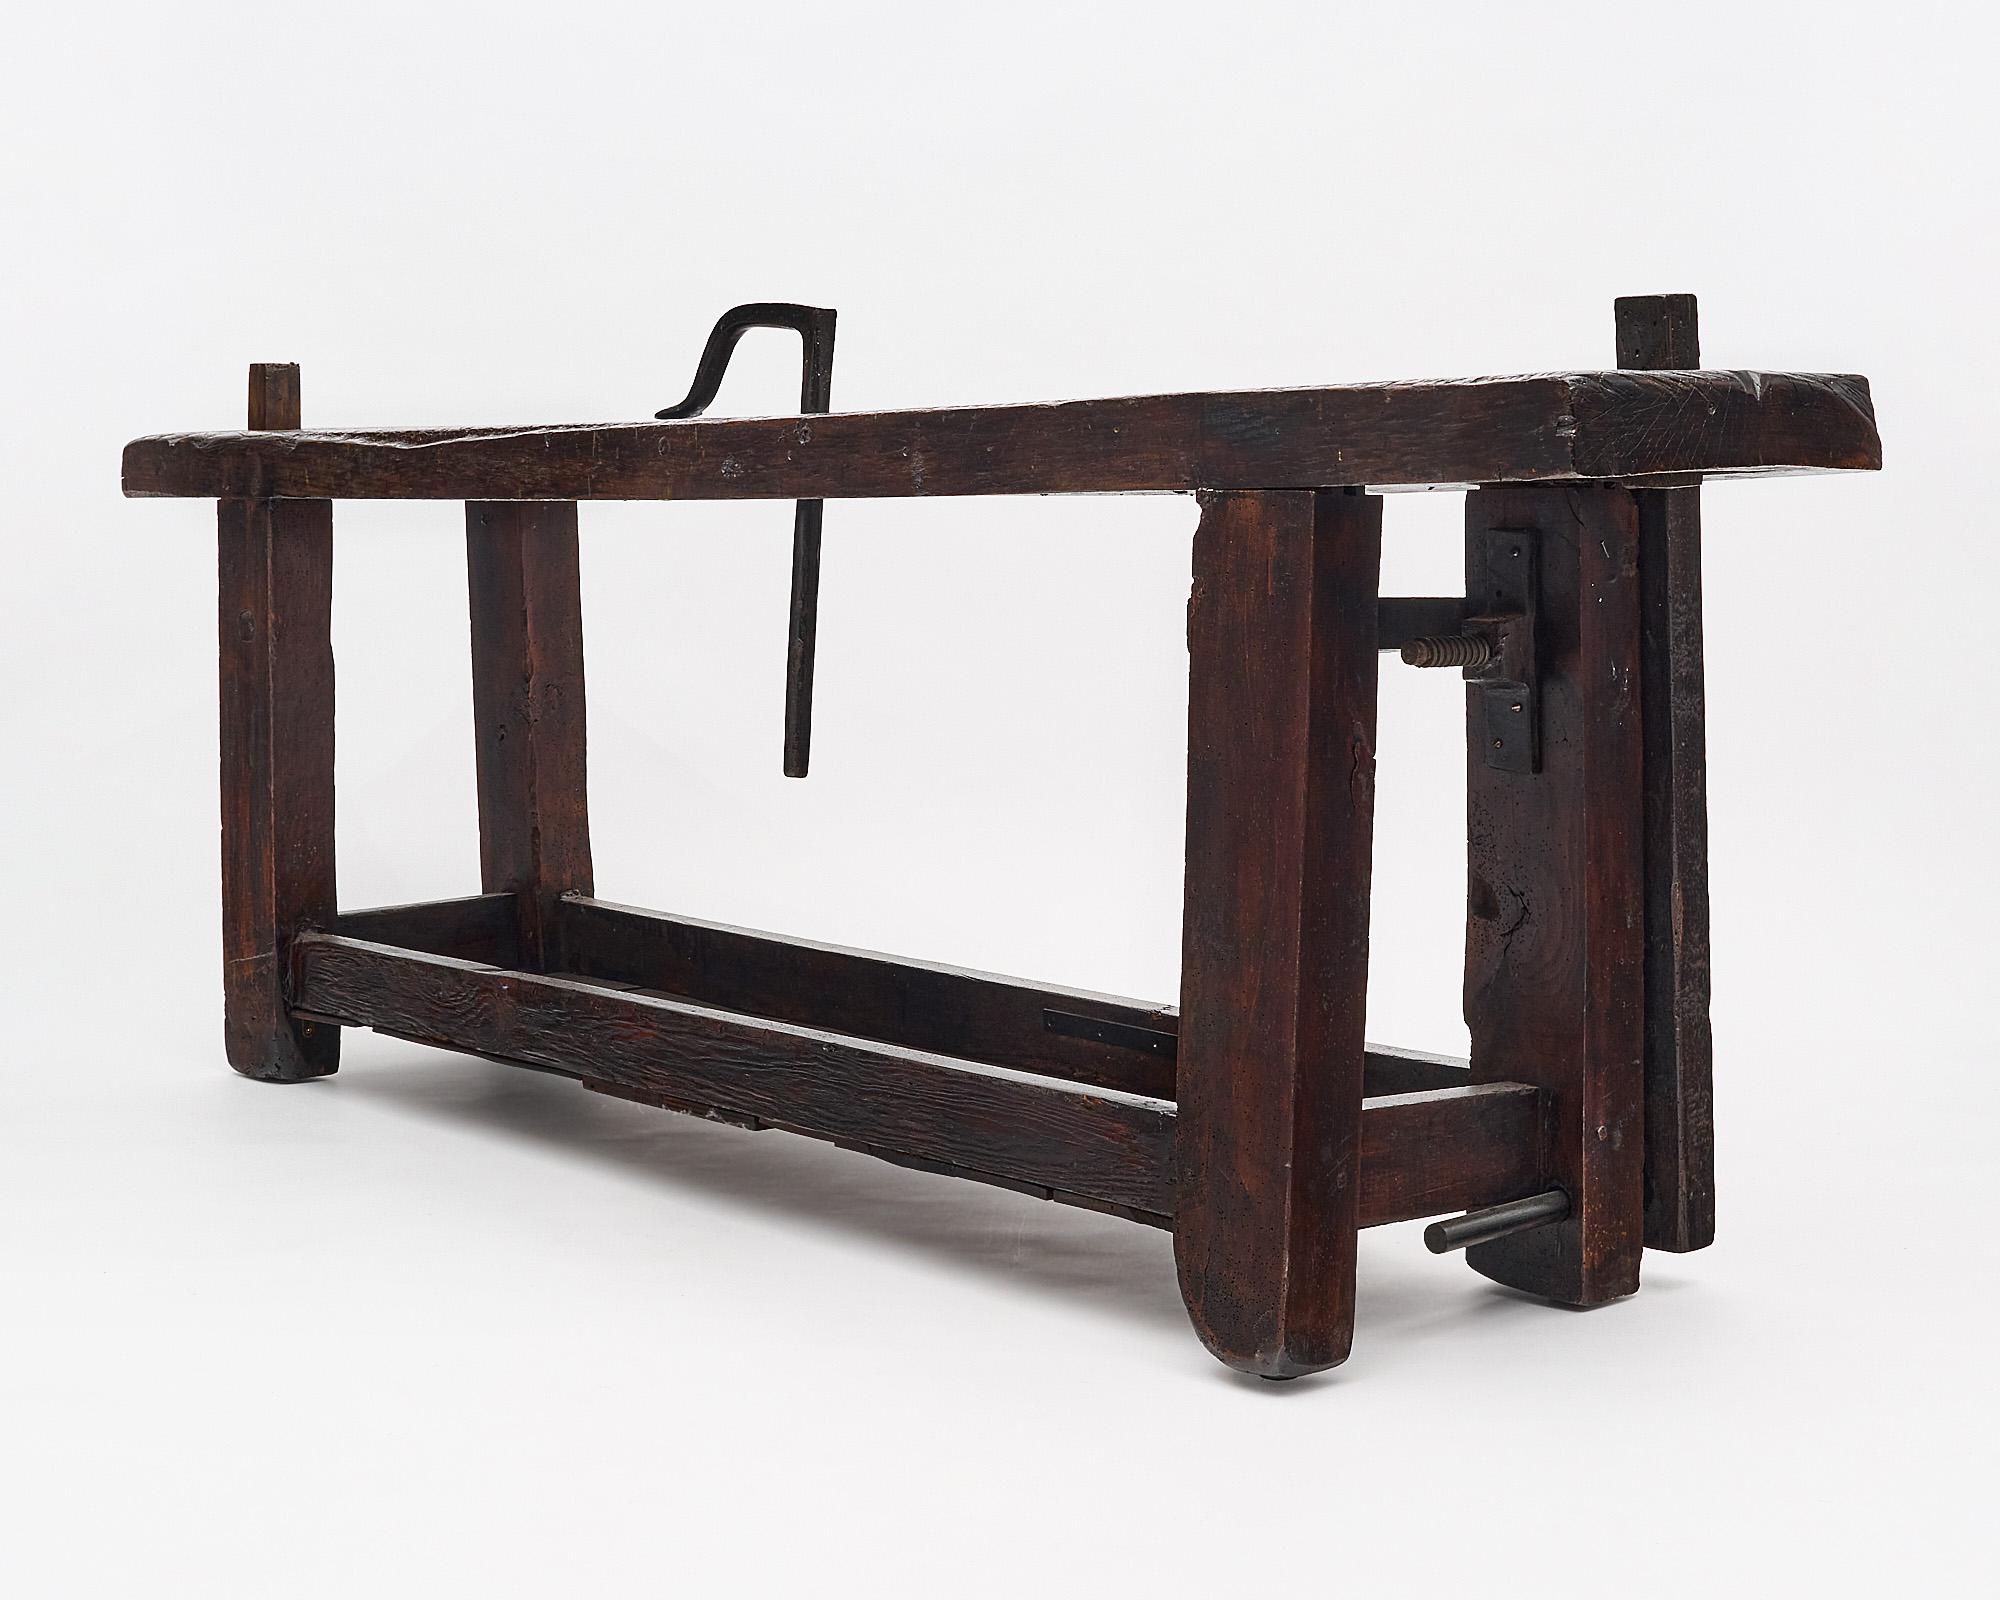 Workbench, French, made of stained and waxed chestnut. The piece features a single top plank, a shelf, and the original vise. The depth listed includes the vise, the depth of the top alone is 17”. The height listed is to the top of the table, it is